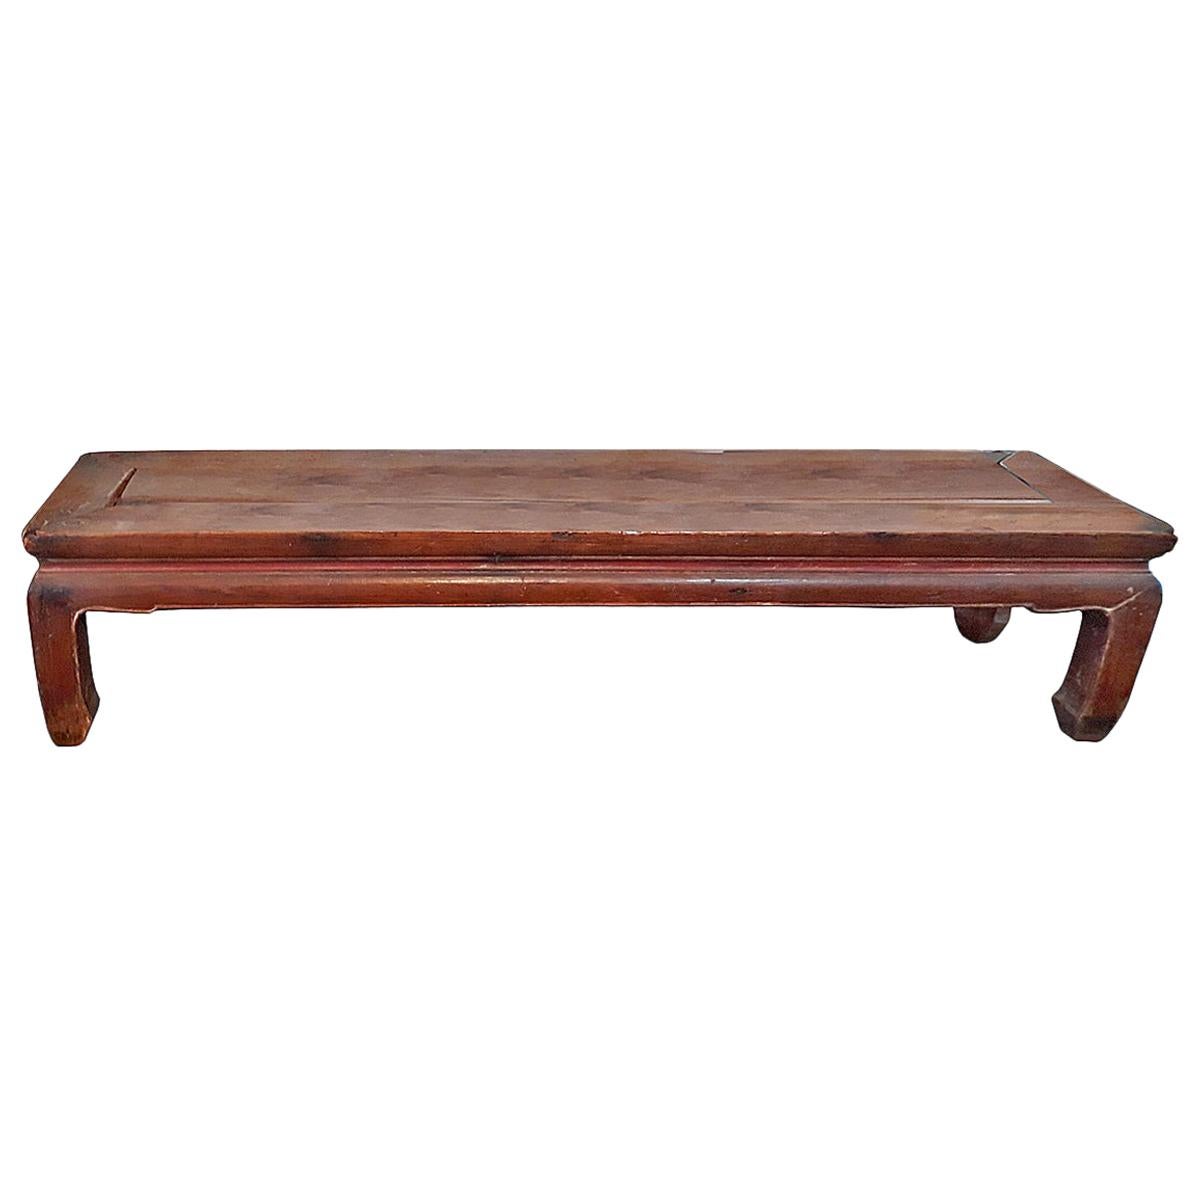 Late 19th Century Wood Altar Table from China